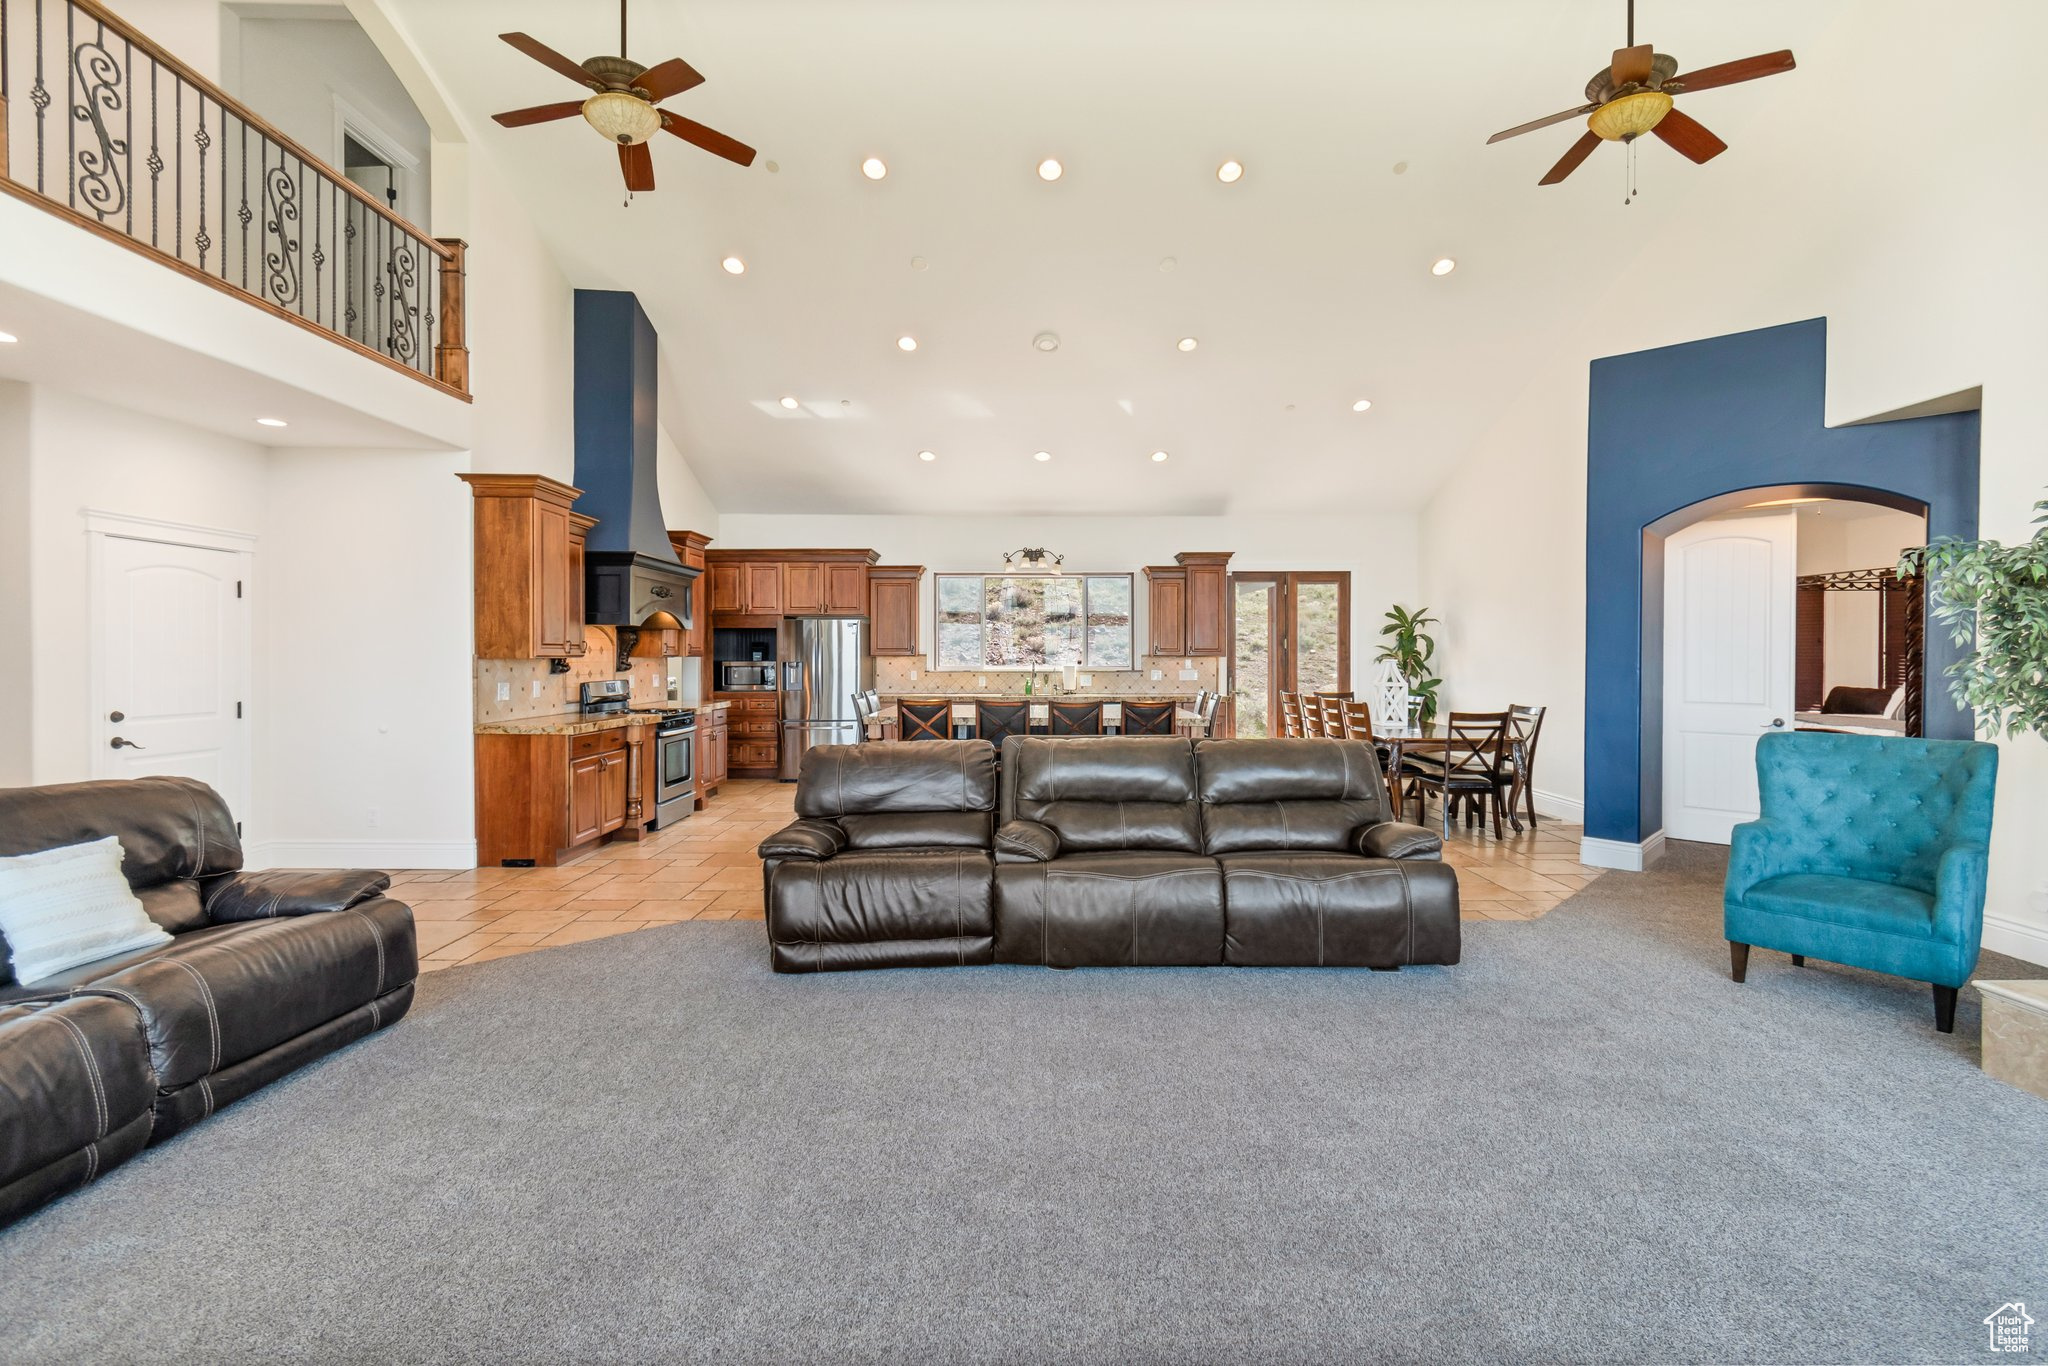 Carpeted living room featuring ceiling fan and high vaulted ceiling